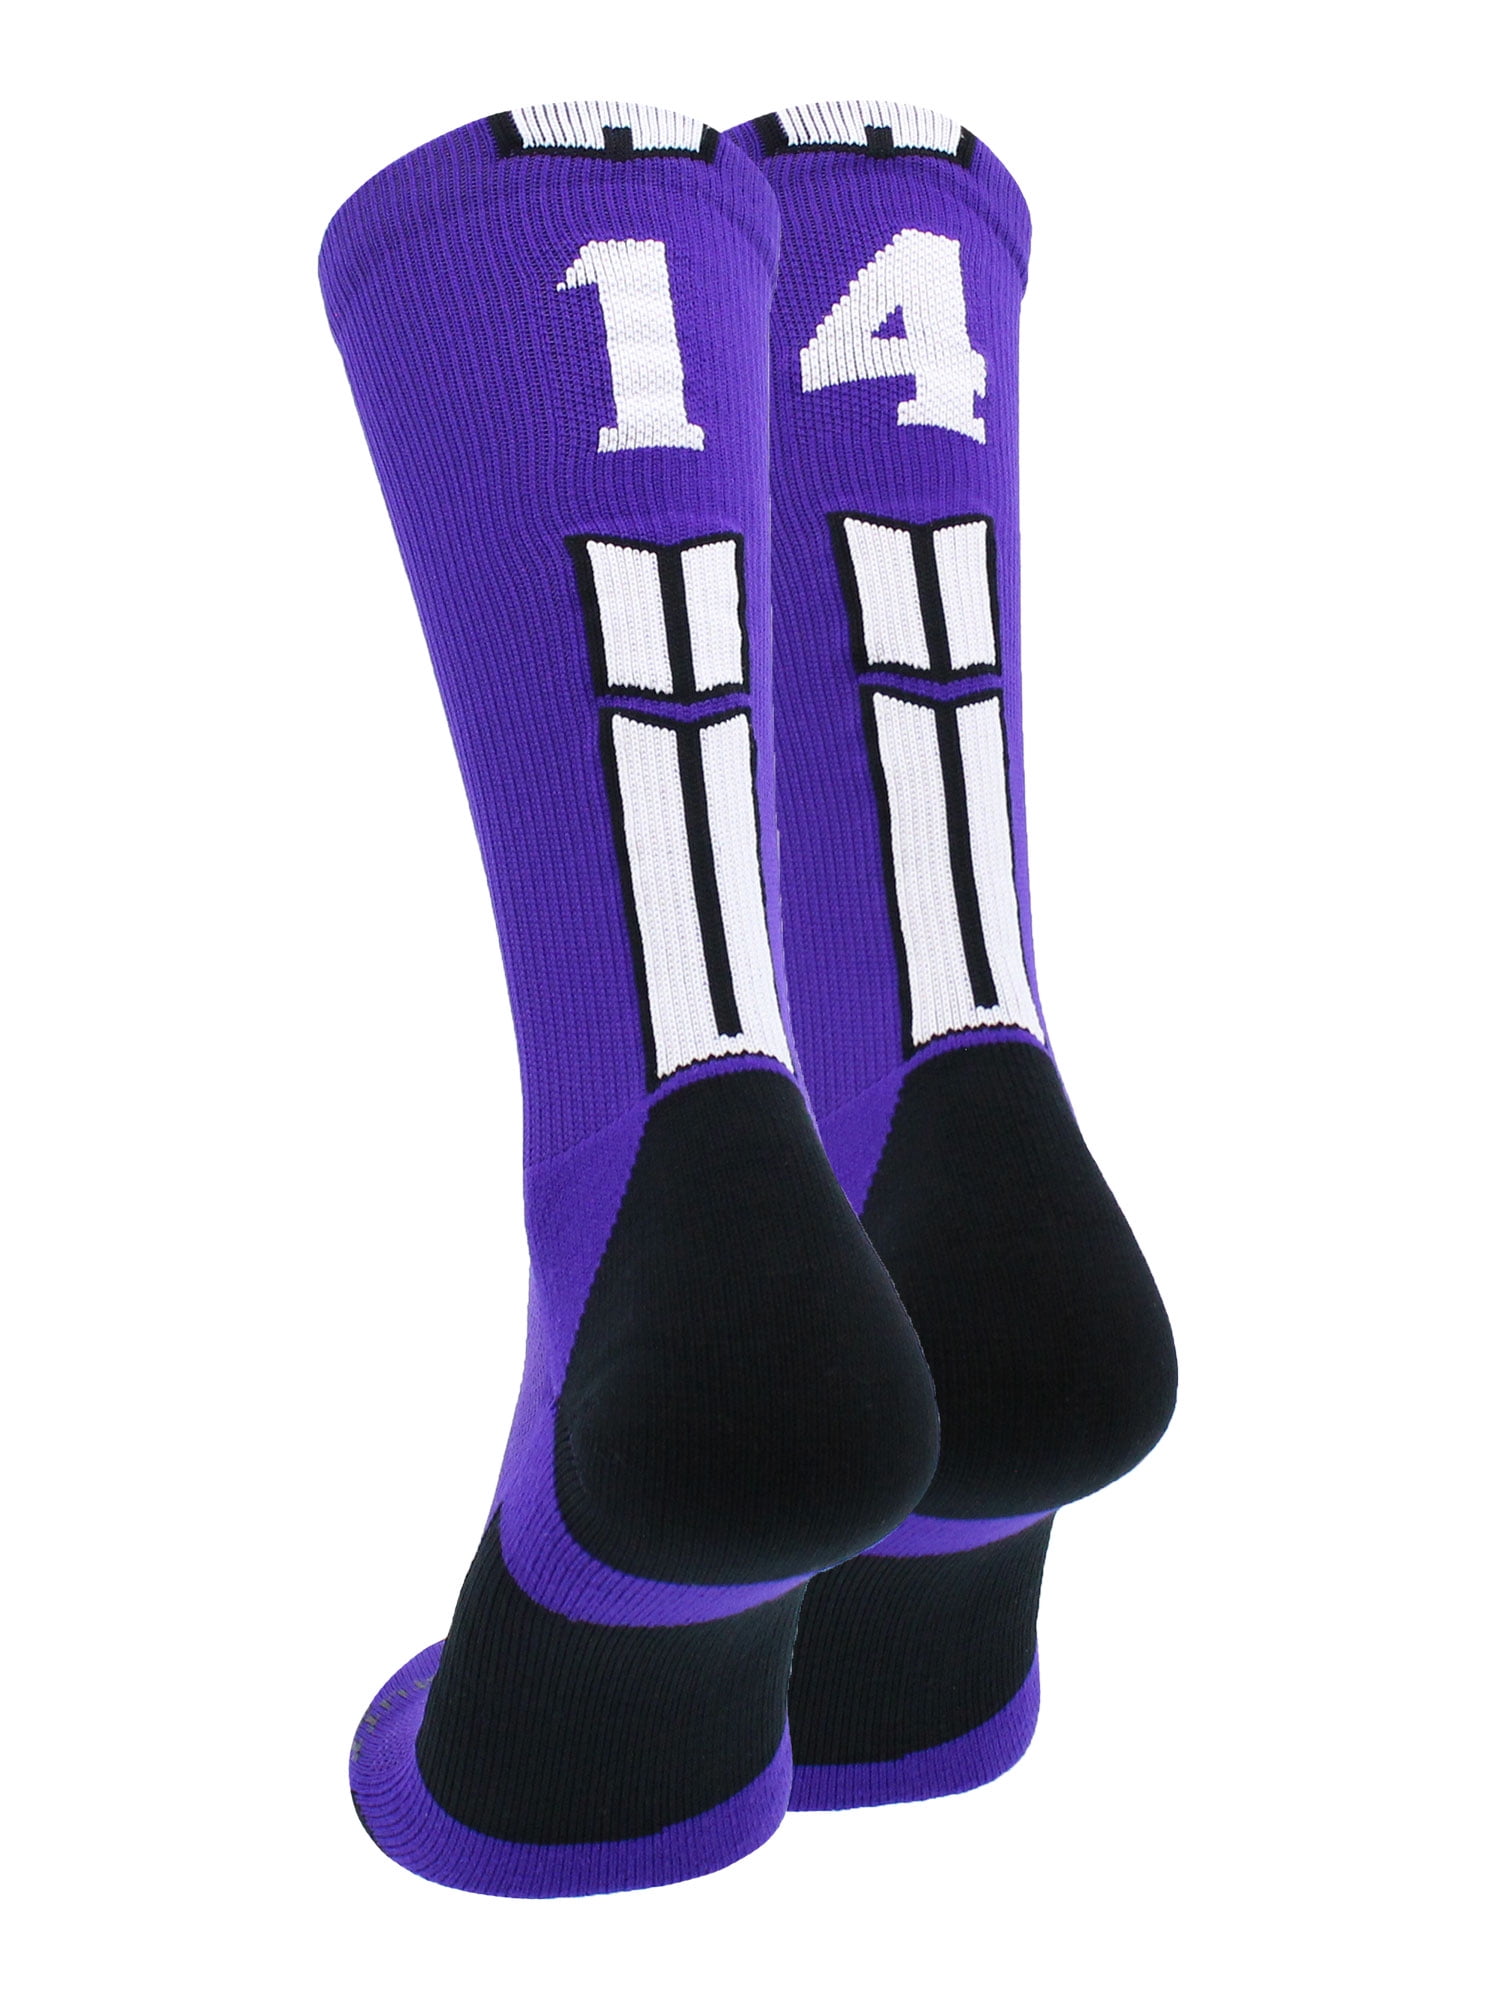 #29, Large MadSportsStuff Player Id Number Socks Over The Calf Purple White